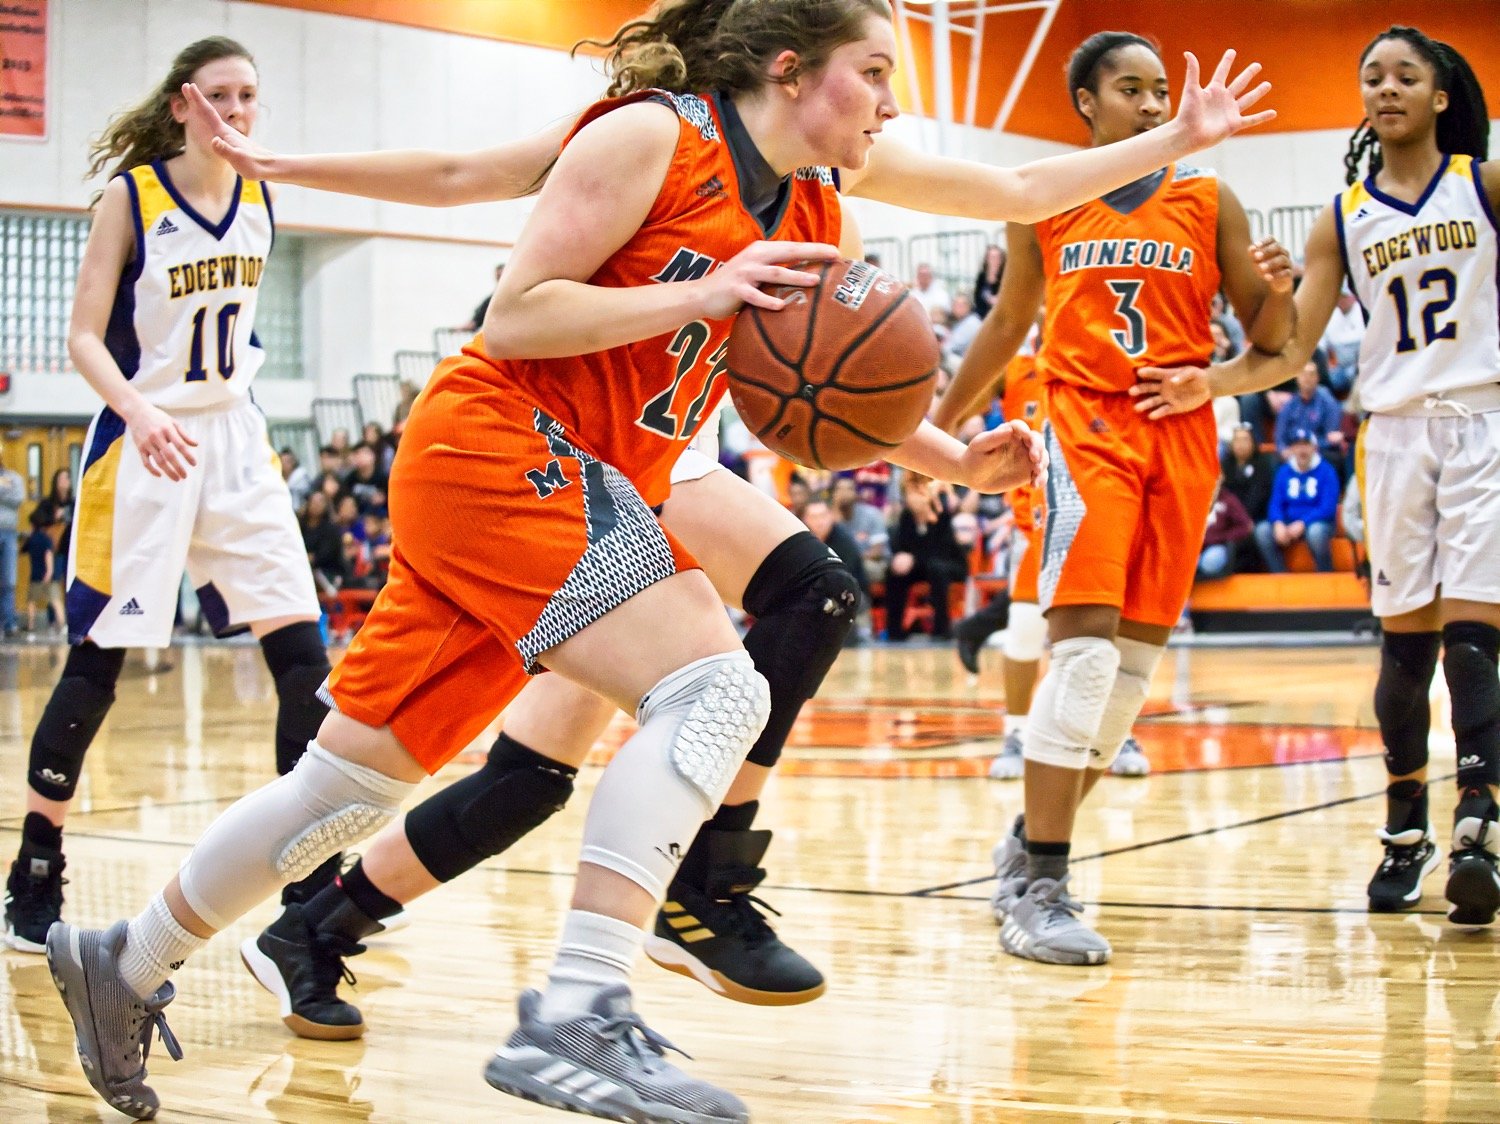 Driving past an Edgewood defender in Grand Saline, Cyndi Butler contributed to a Lady Jacket win, despite being ill, giving Mineola a district championship and propelling them into the playoffs.